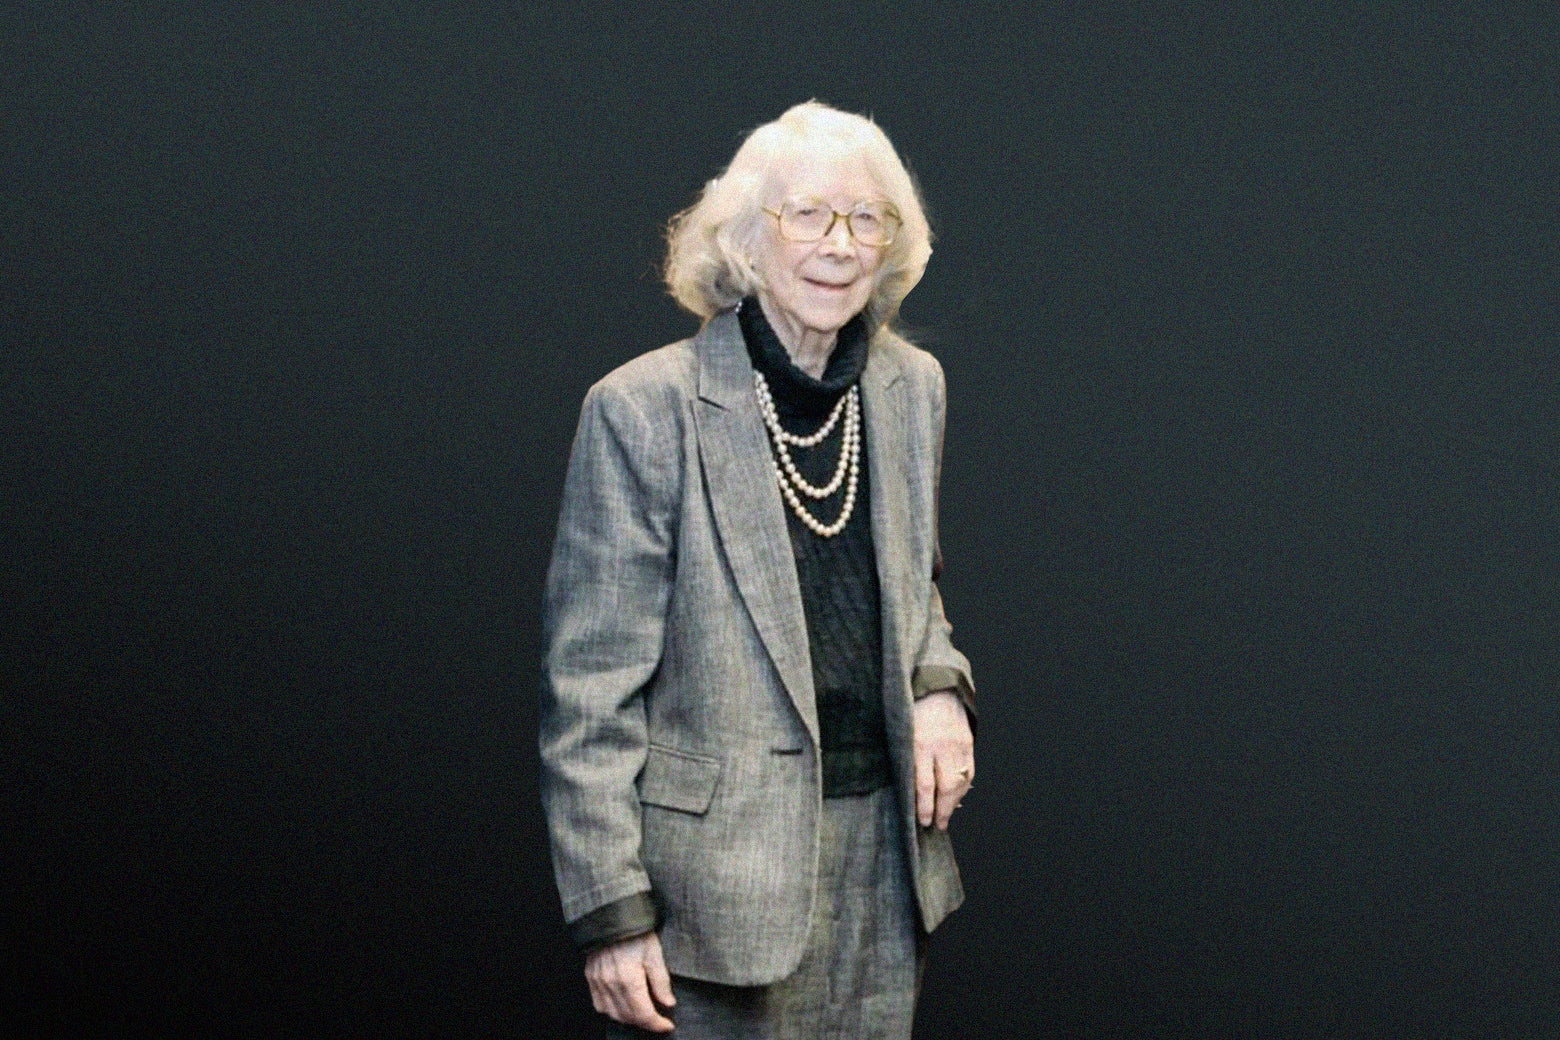 An elderly woman in a gray suit wearing large glasses, smiling.